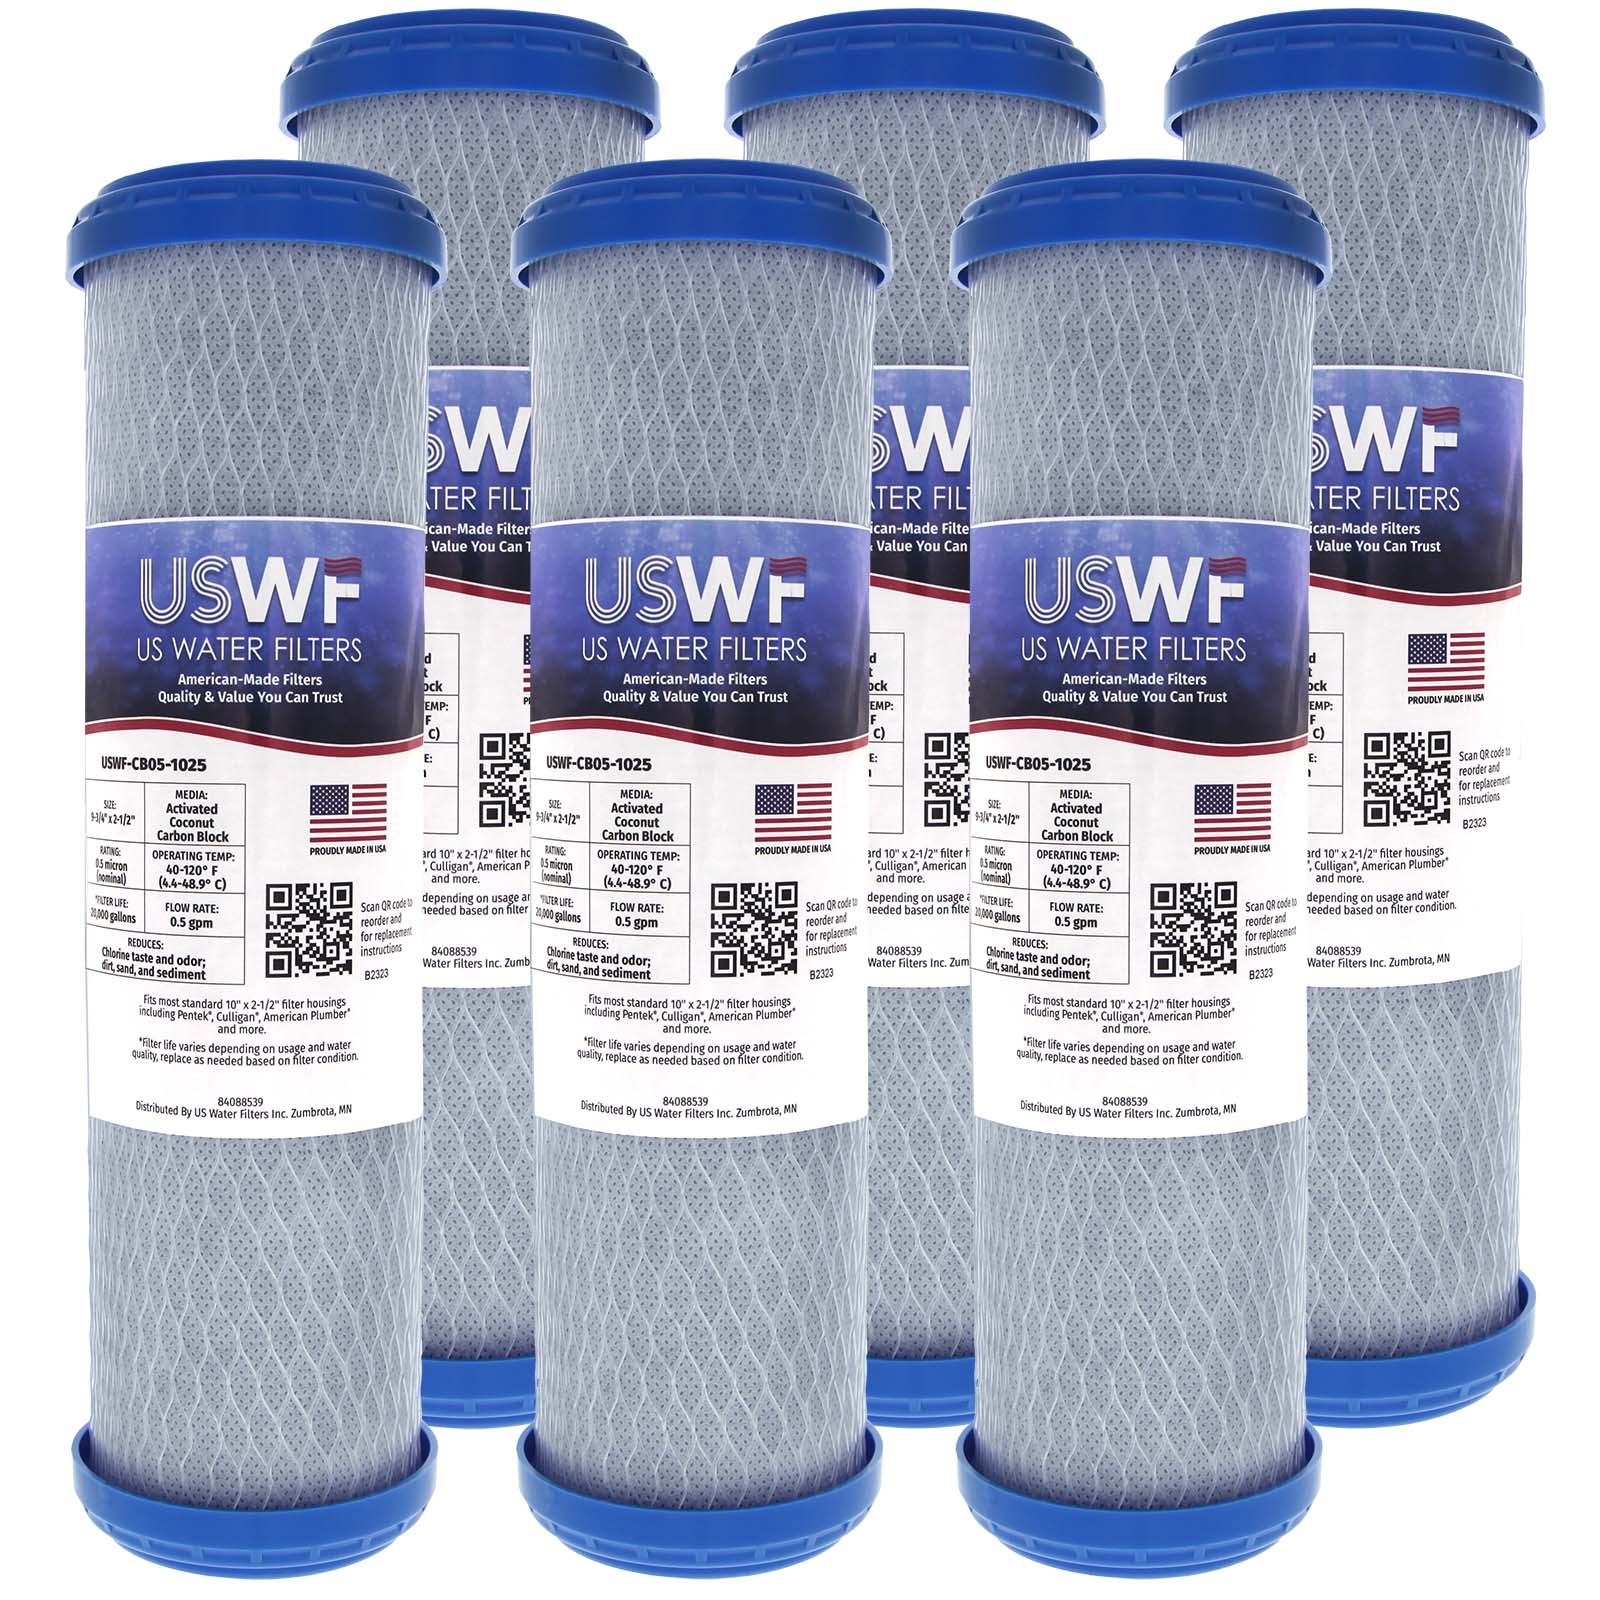 Coconut Carbon Block Filter by USWF 0.5 Micron 10"x2.5"